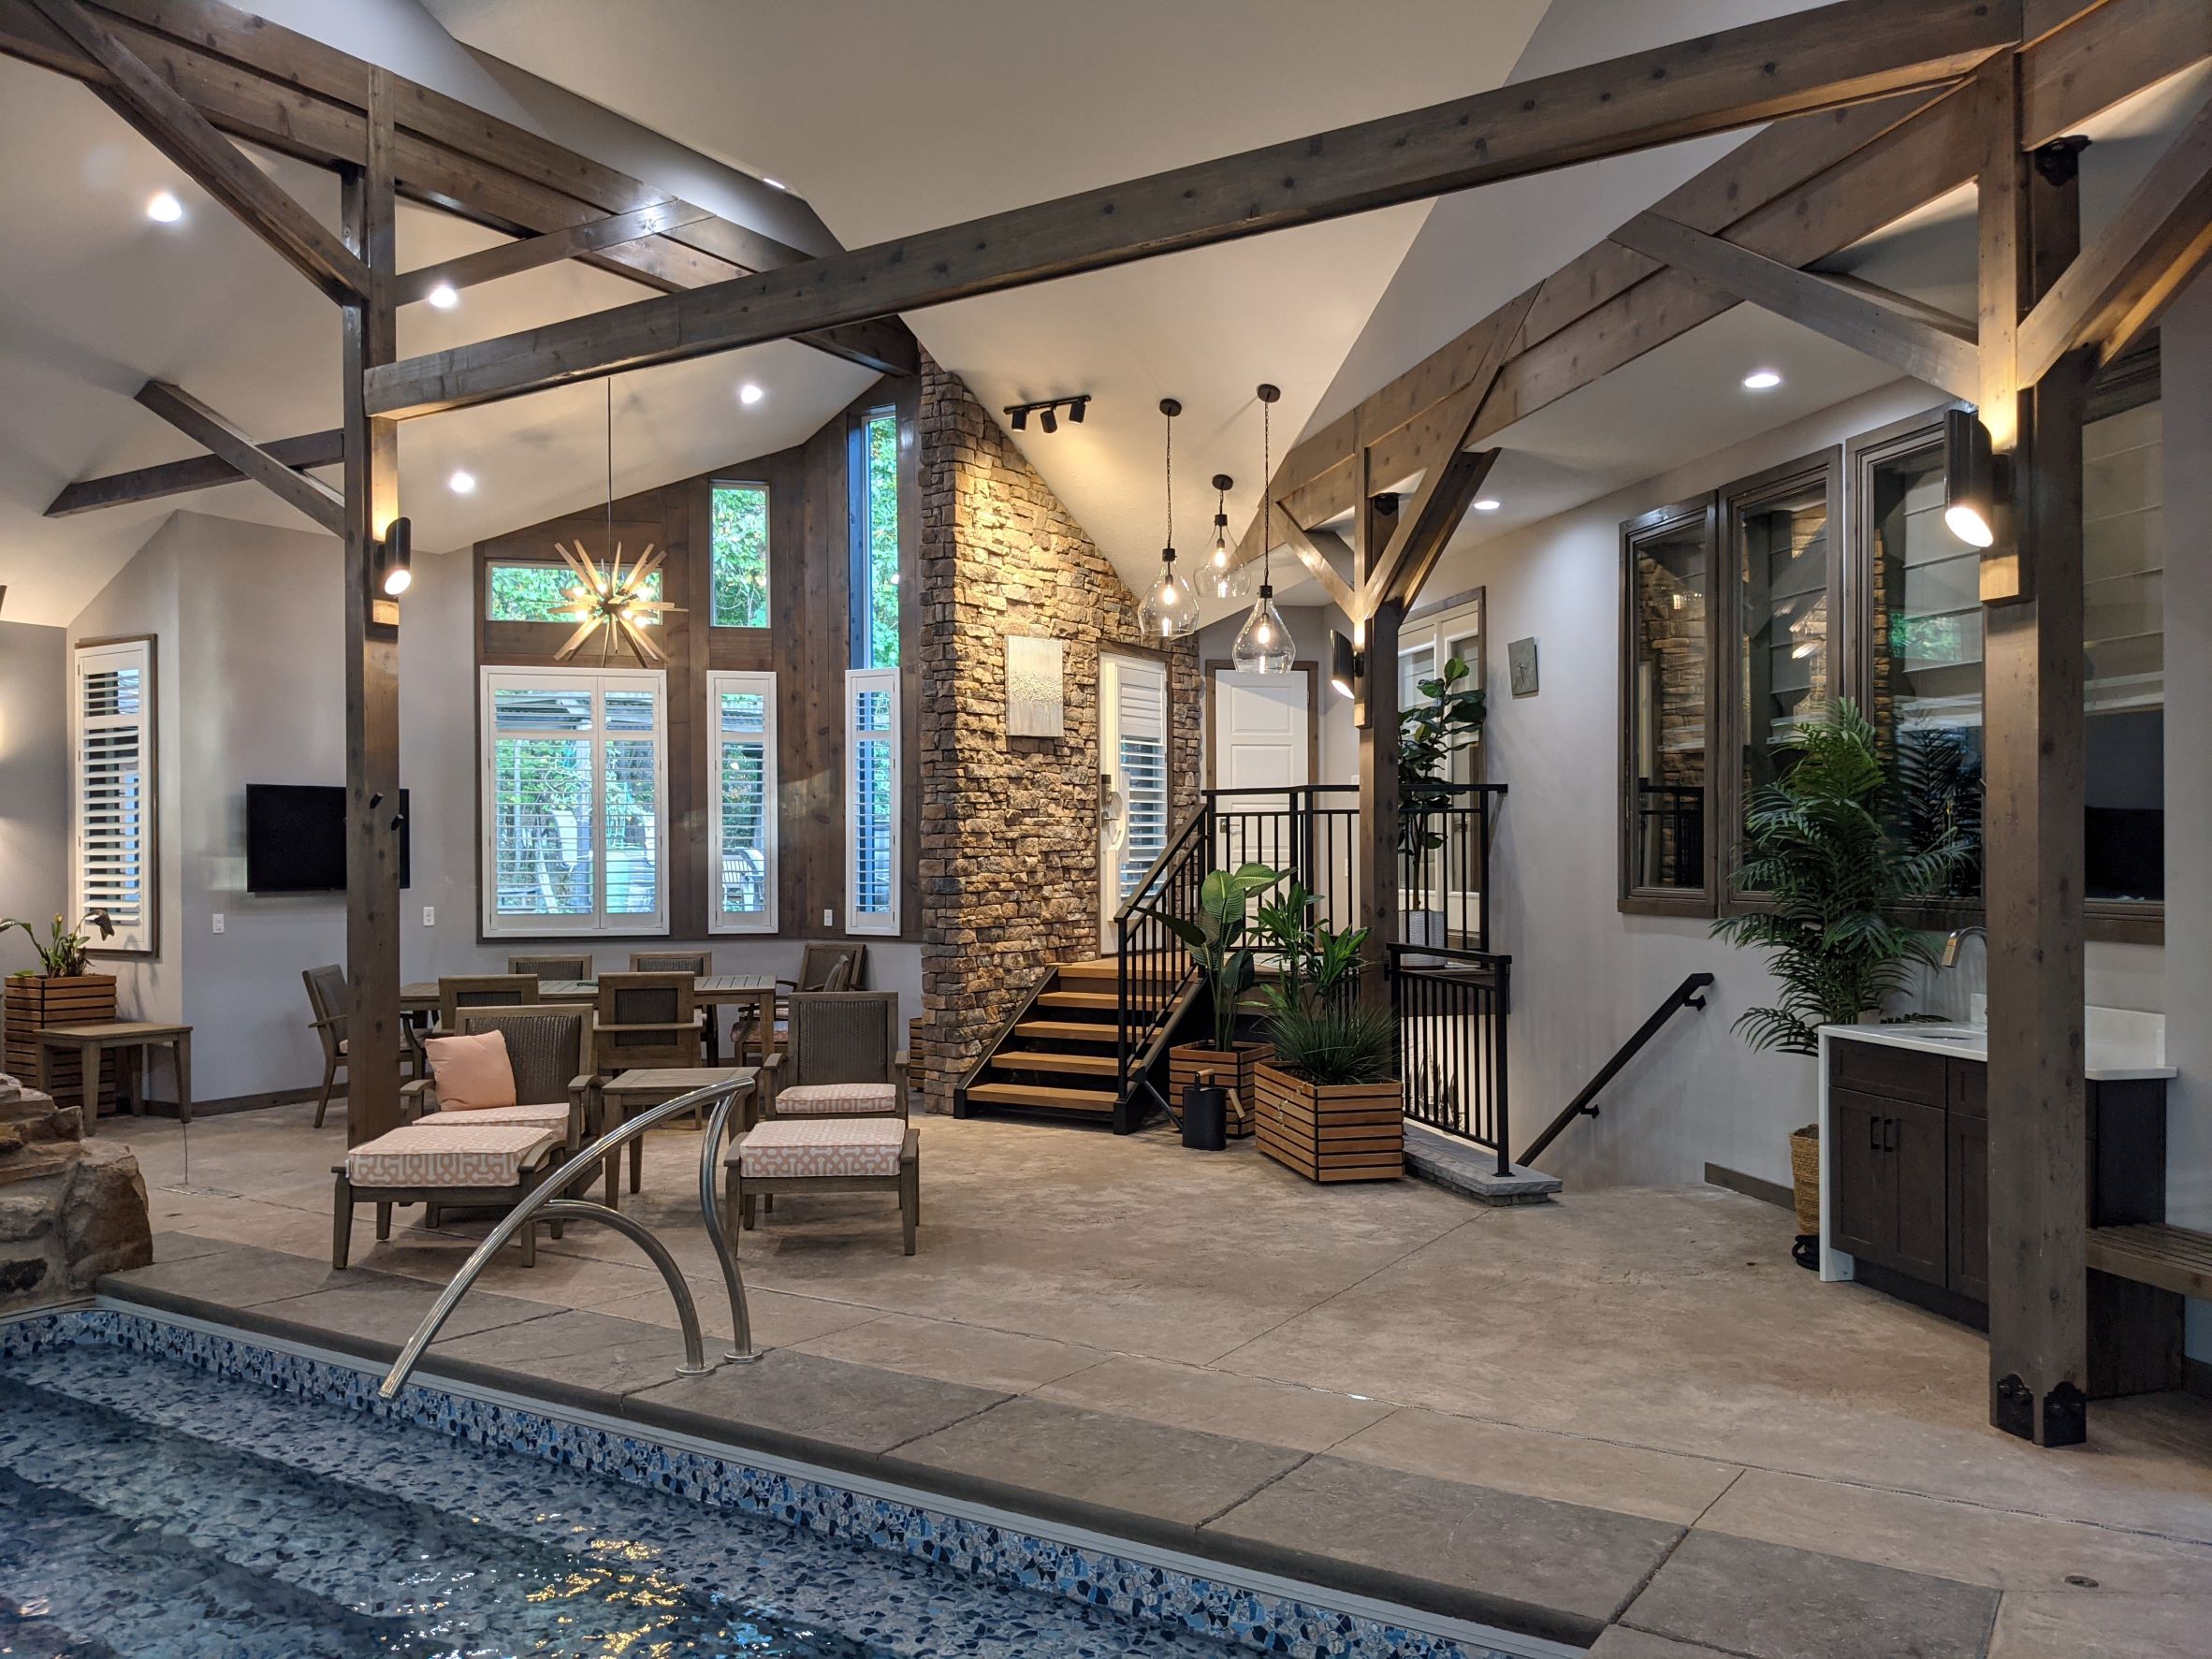 Interior View of Residential Pool Addition to Private Home with Swimming Pool in foreground and decorative stone, geometric windows, and stair in background outside of Pittsburgh Pennsylvania